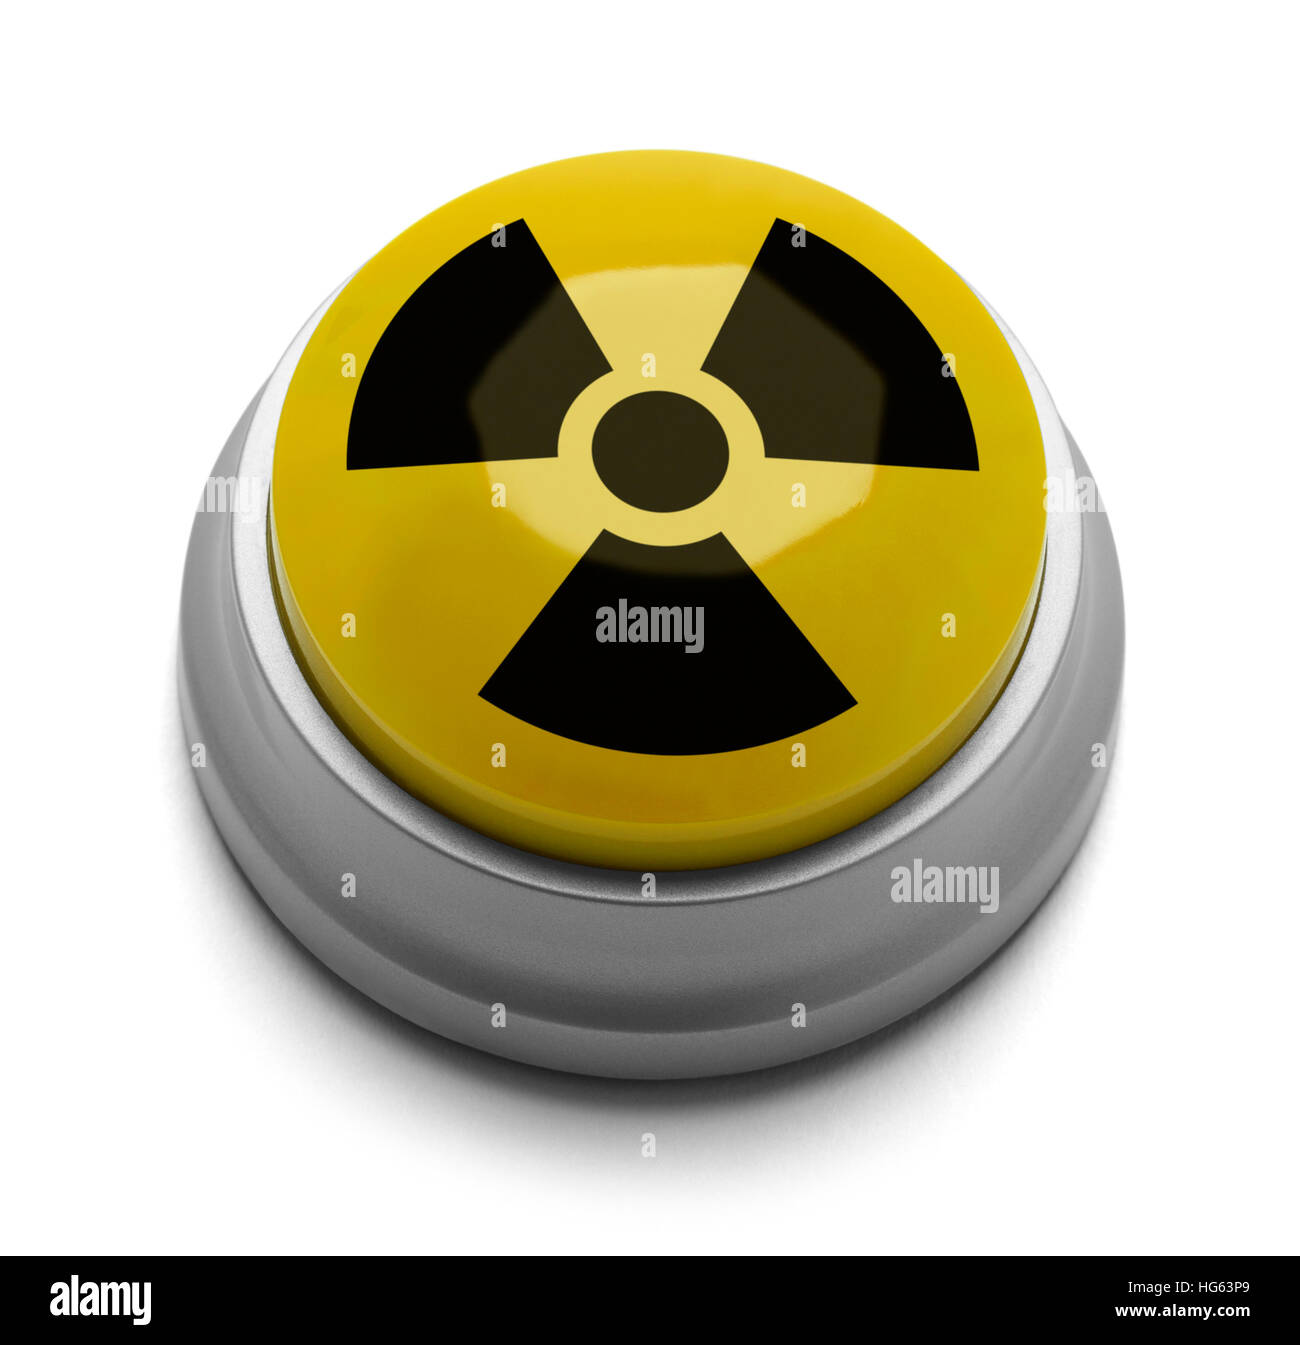 Yellow and Black Nuclear Button Isolated on White Background. Stock Photo